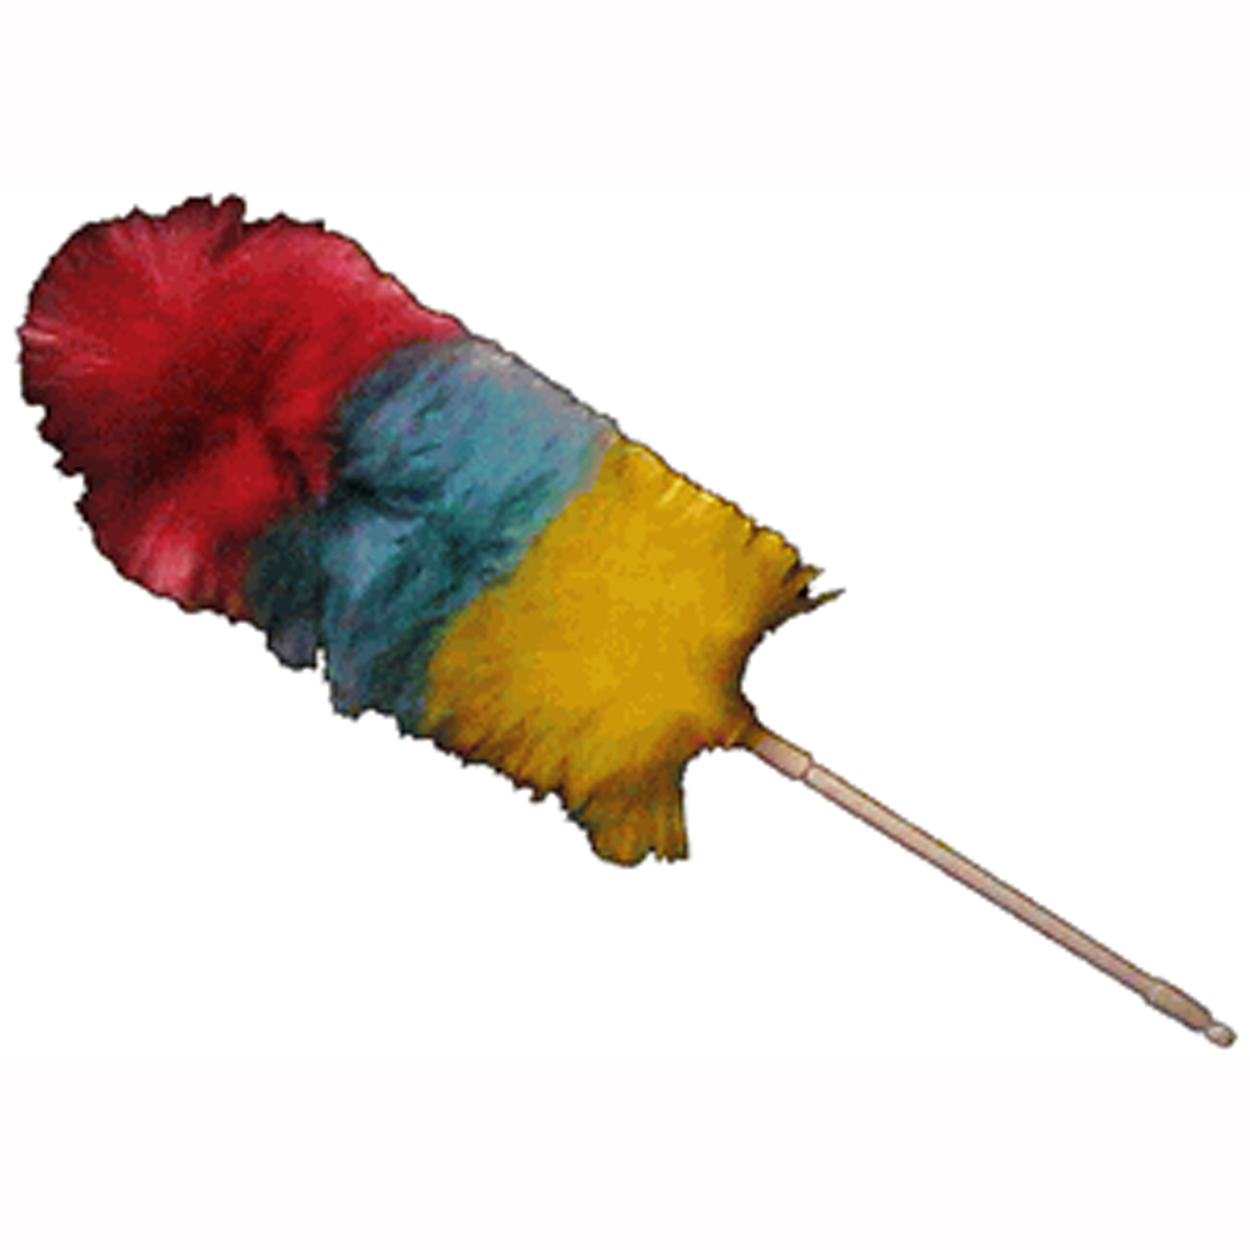 Polywool Duster - 20"